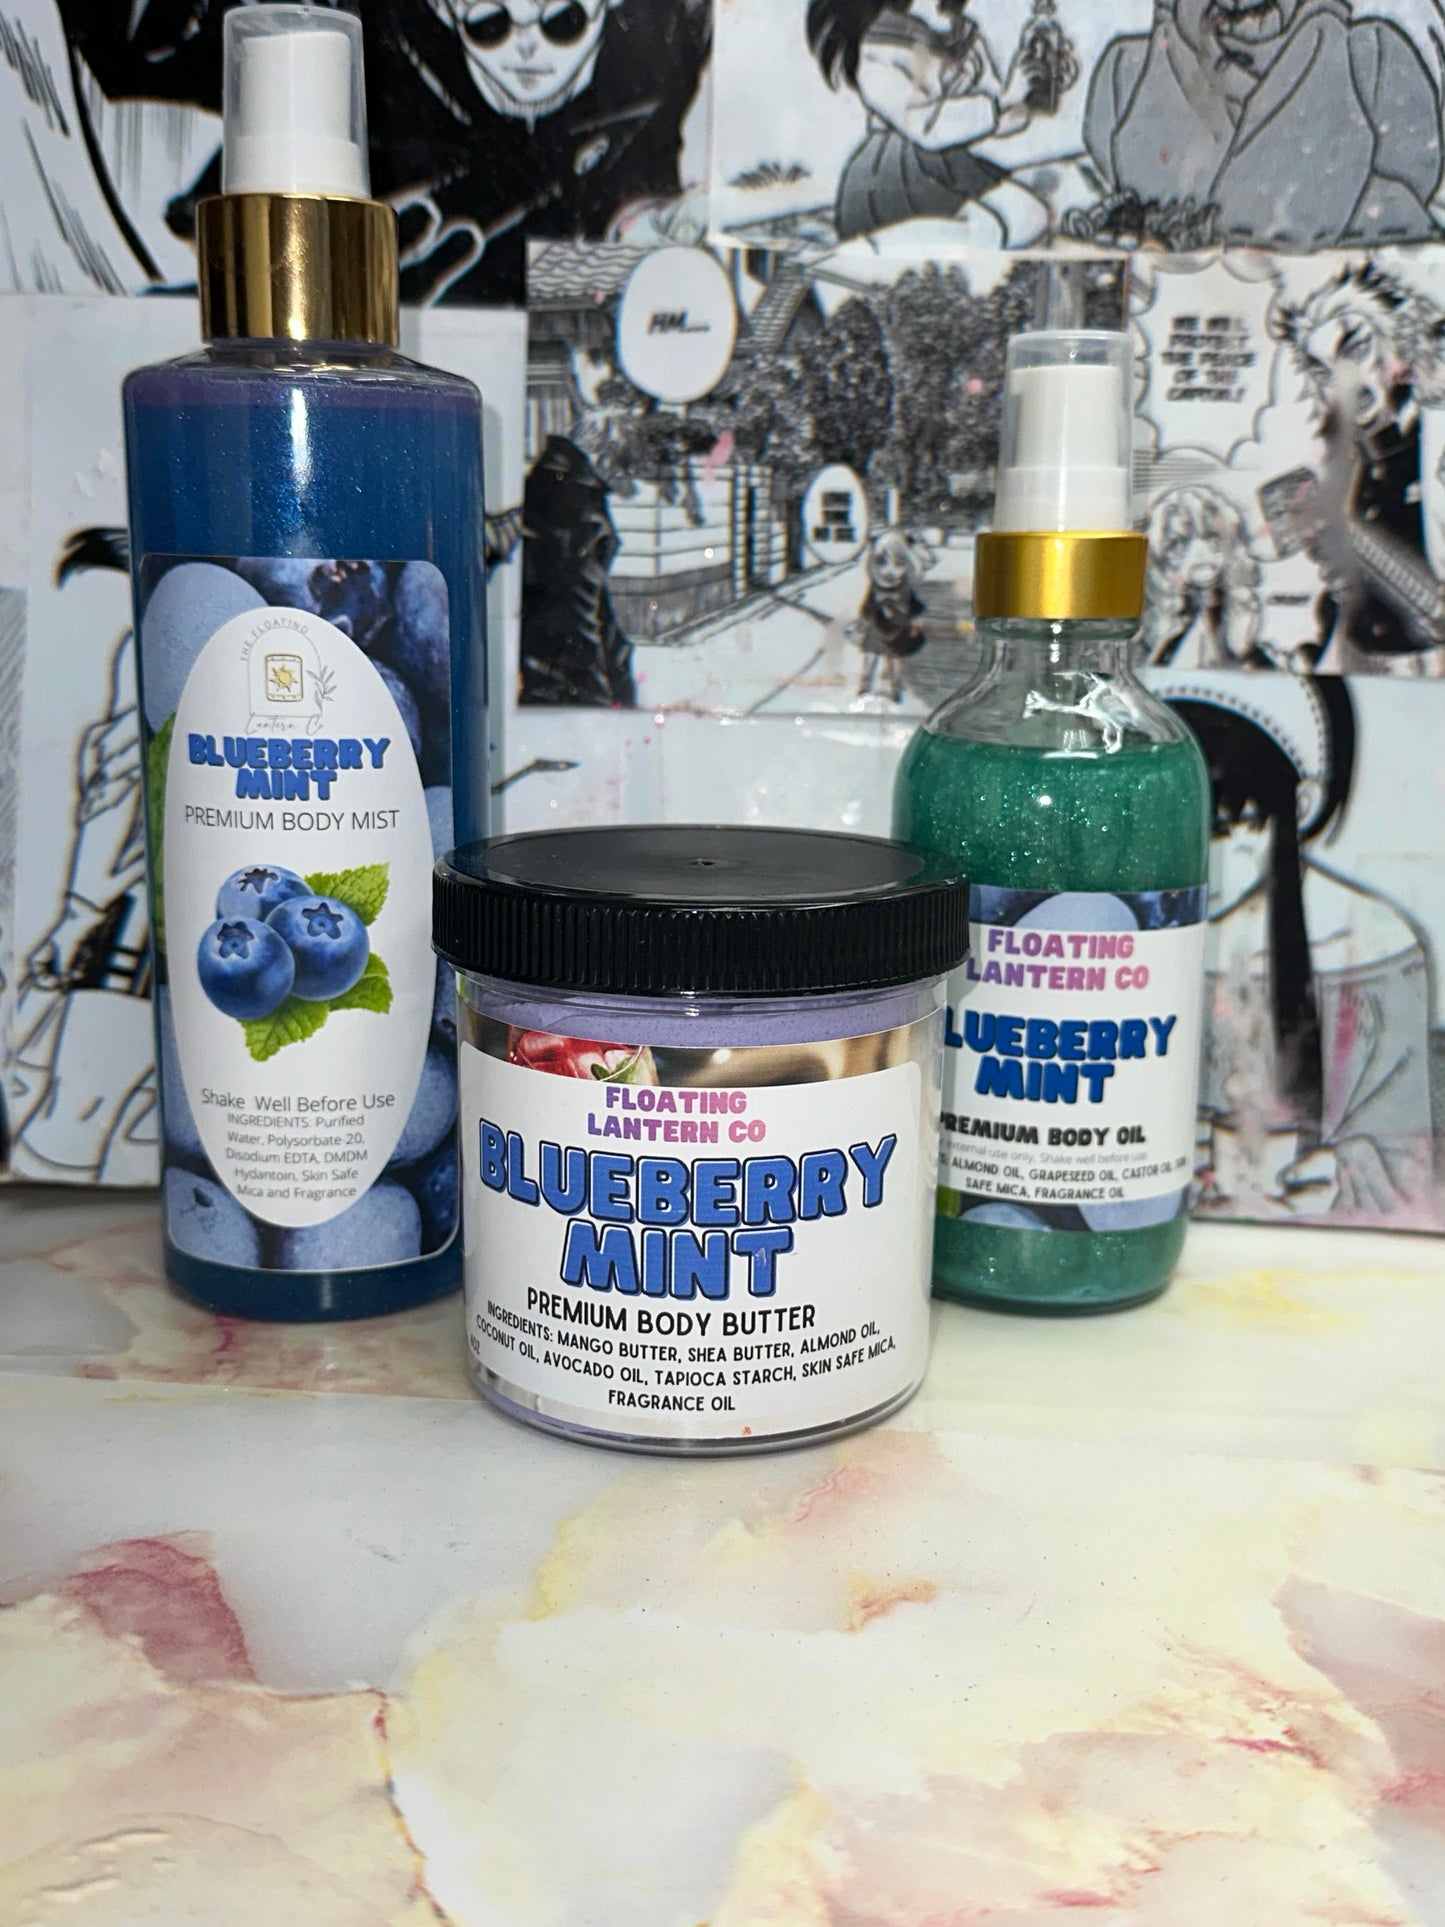 Scent of the restock: BLUEBERRY MINT